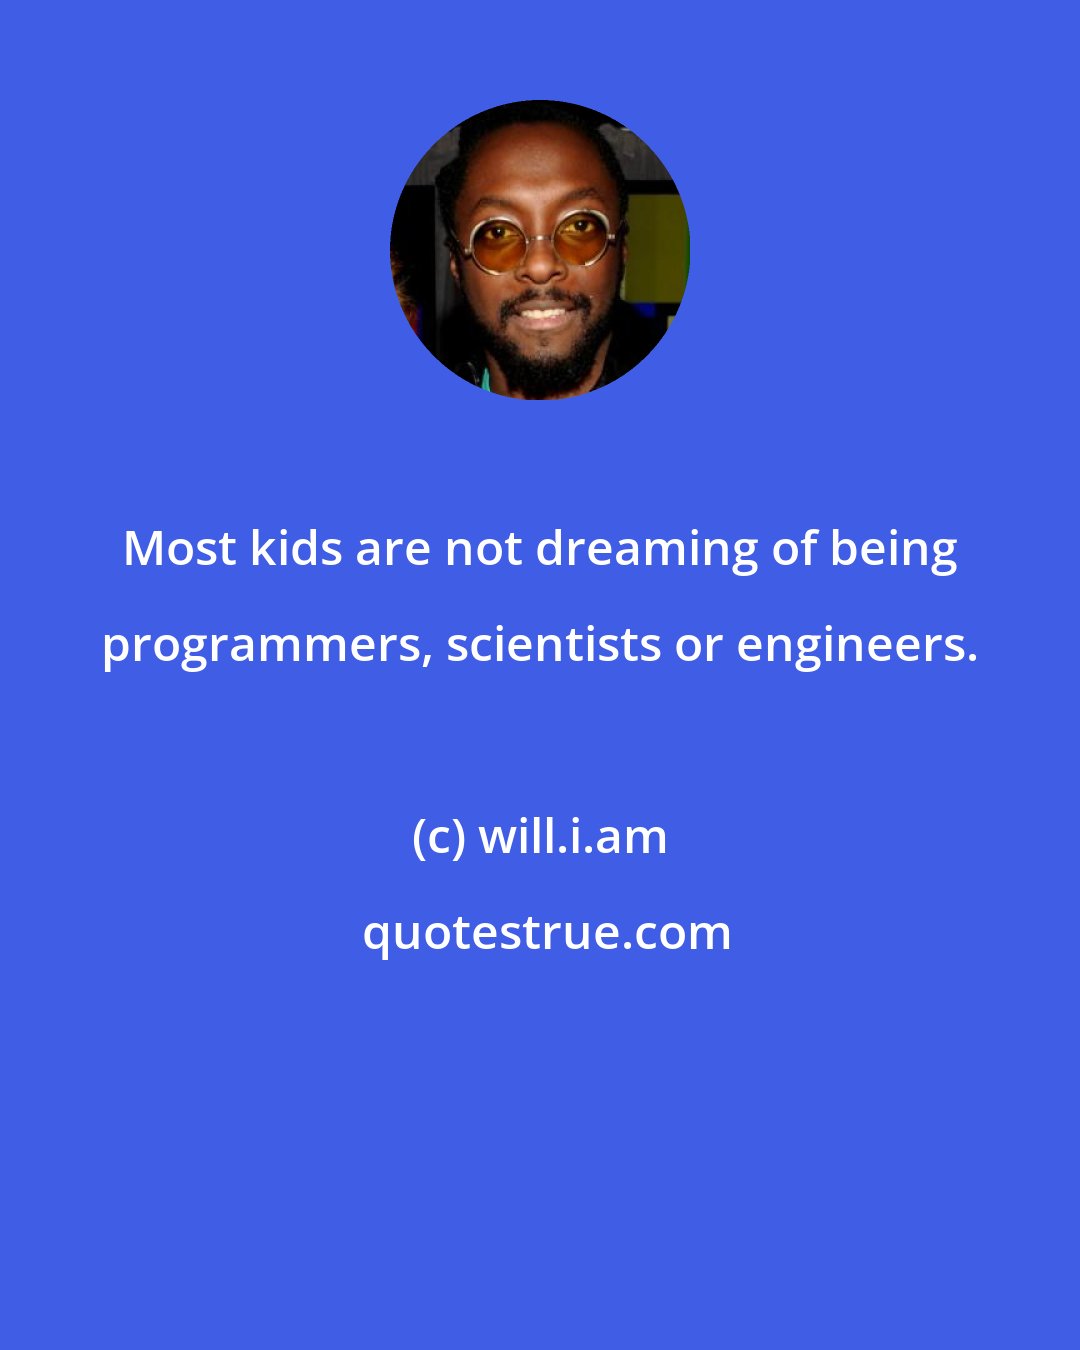 will.i.am: Most kids are not dreaming of being programmers, scientists or engineers.